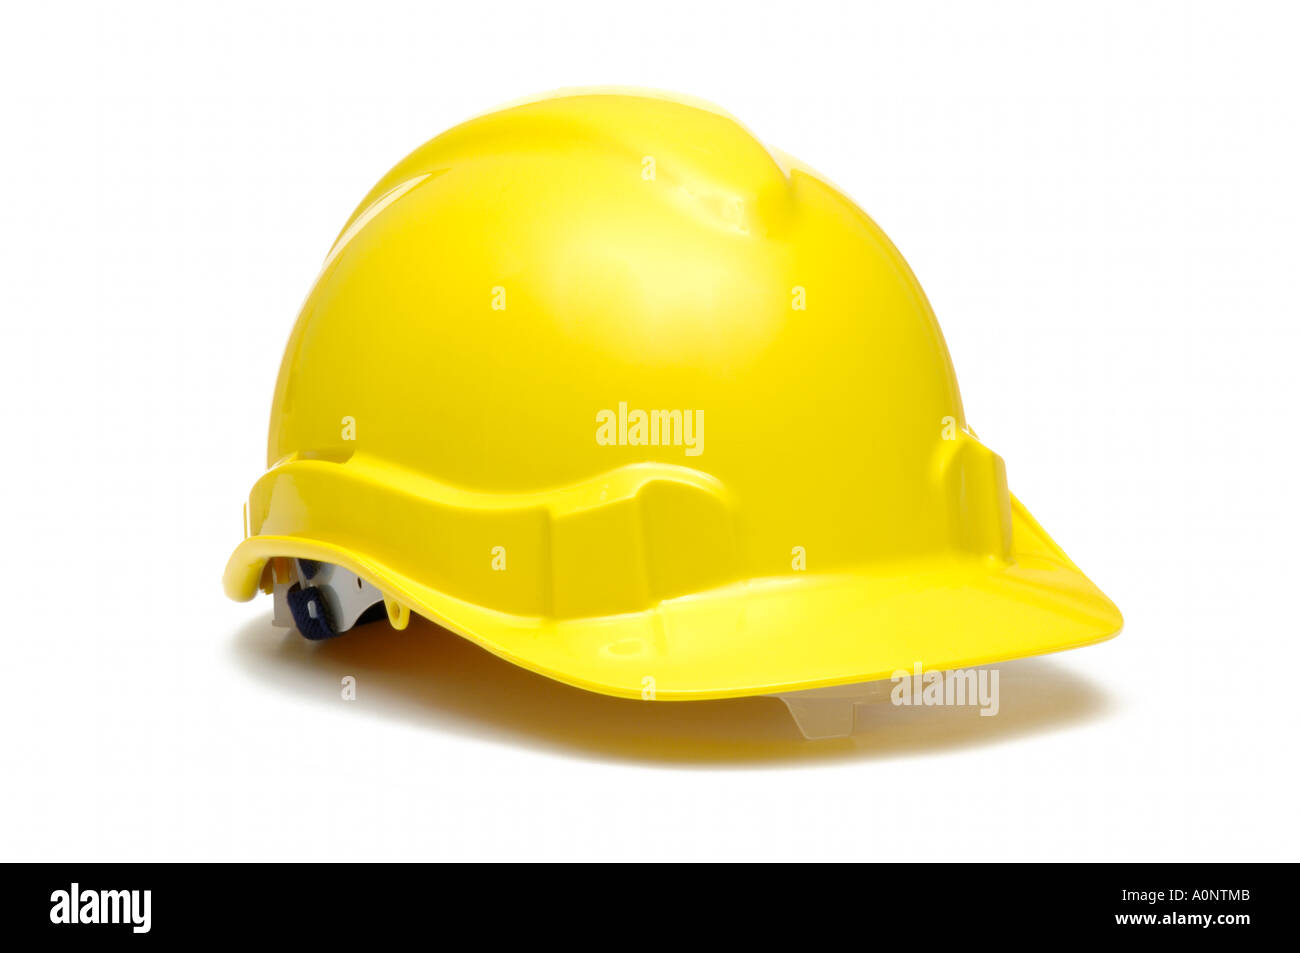 Yellow protective hard hat or helmet on white background Stock Photo